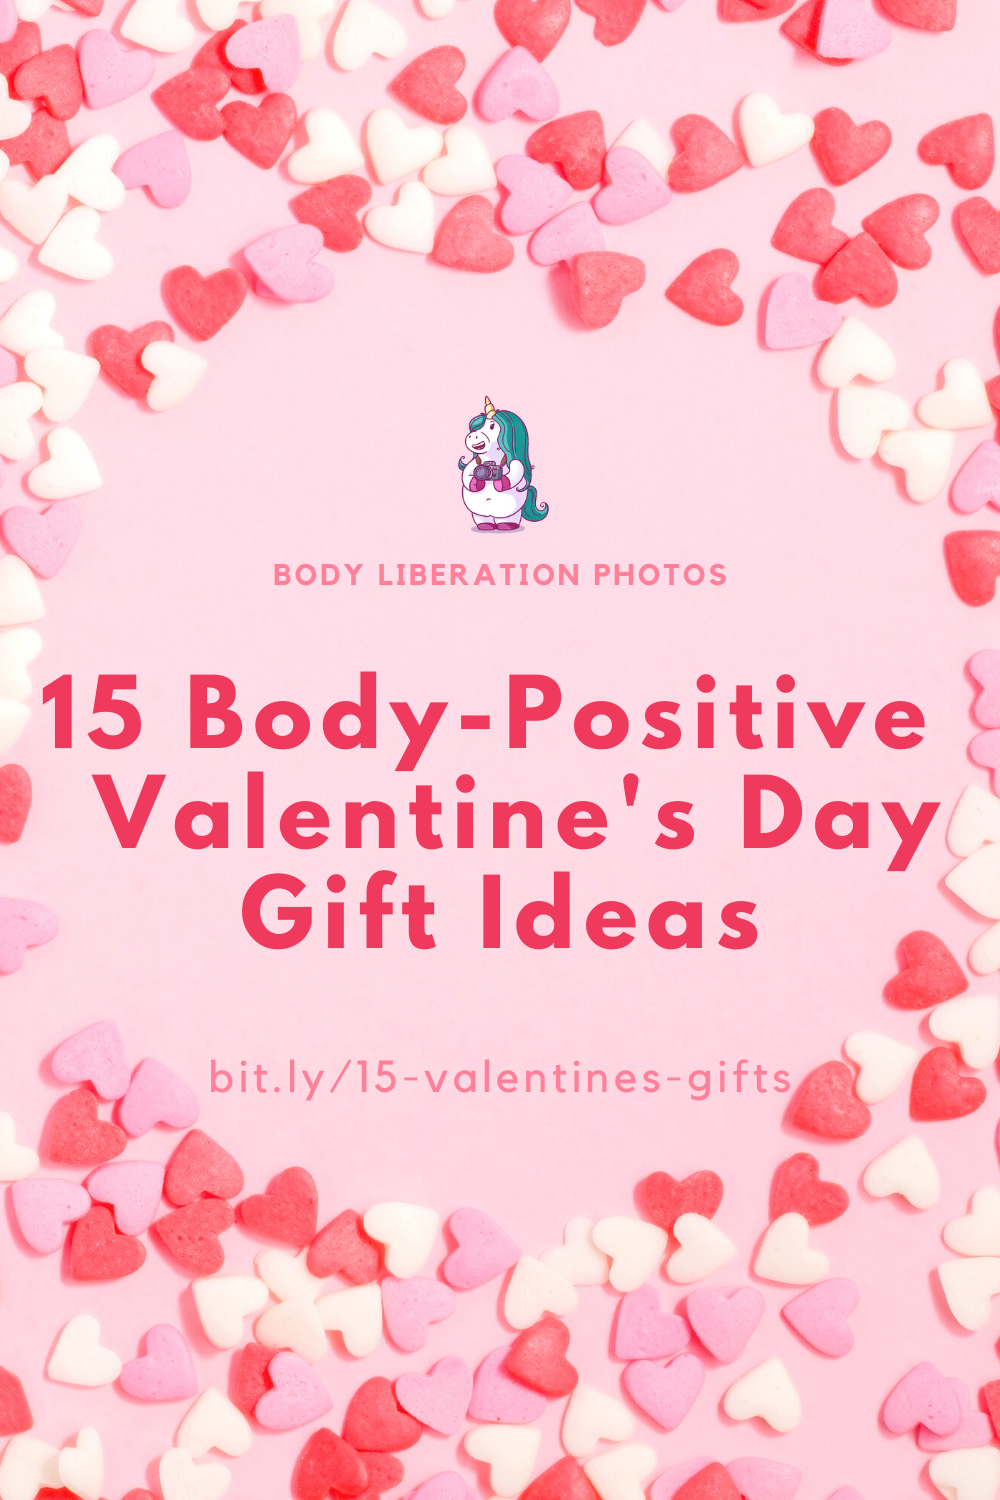 Red, pink and white candy hearts on a pink background surround the words "15 Body-Positive Valentine's Day Gift Ideas." Lindley's unicorn logo is at the top and the post URL is at the bottom.